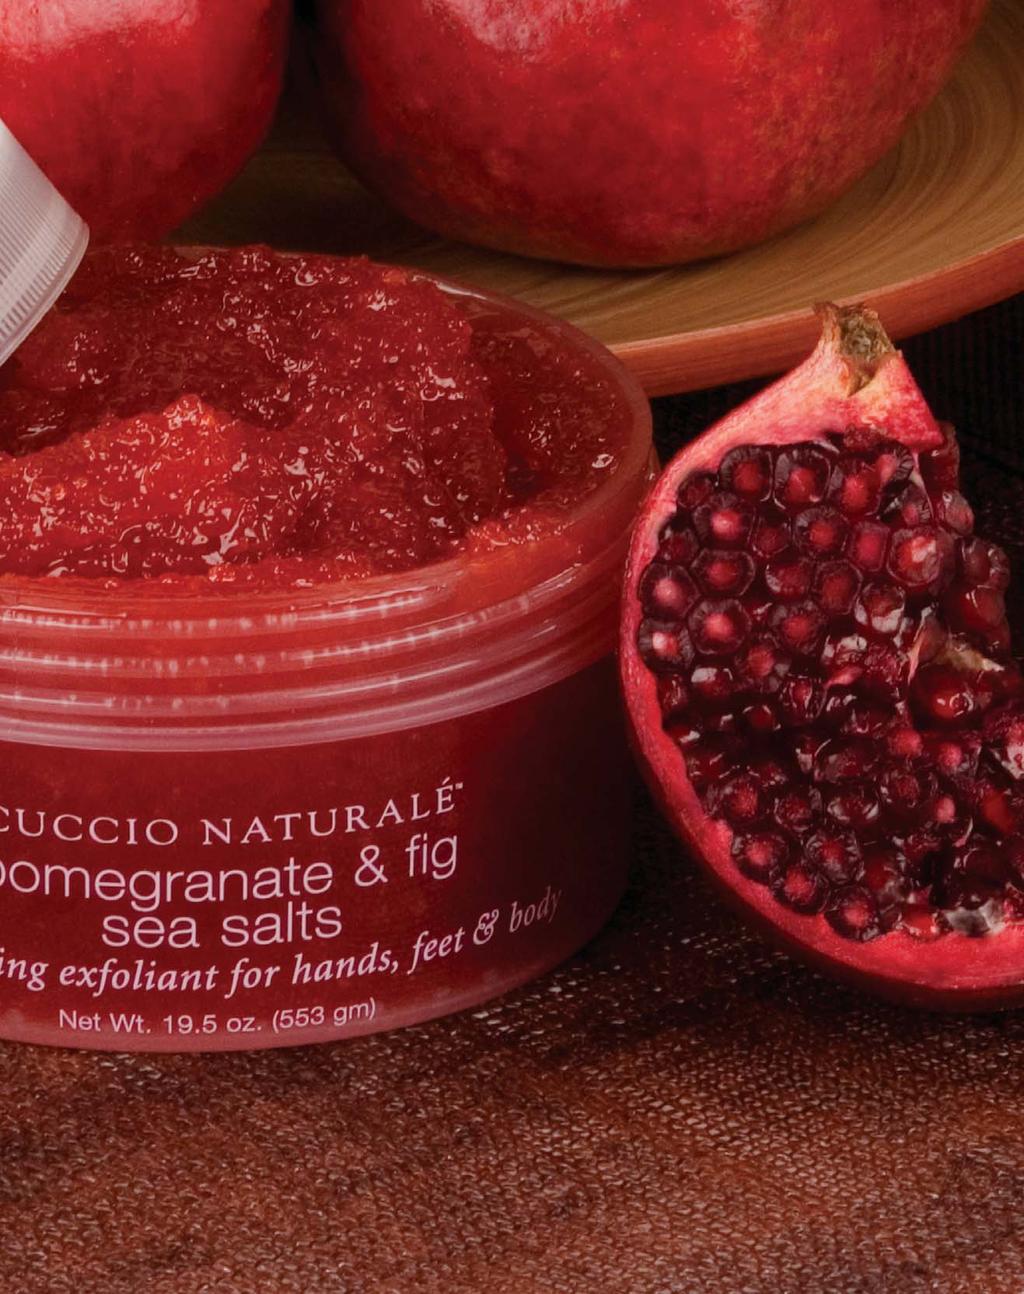 Nails Magazine Readers Choice New Product 2007 Sea Salts Rich in minerals, natural sea salts gently exfoliate to reveal softer and silkier skin while pomegranate and fig extracts provide nourishing